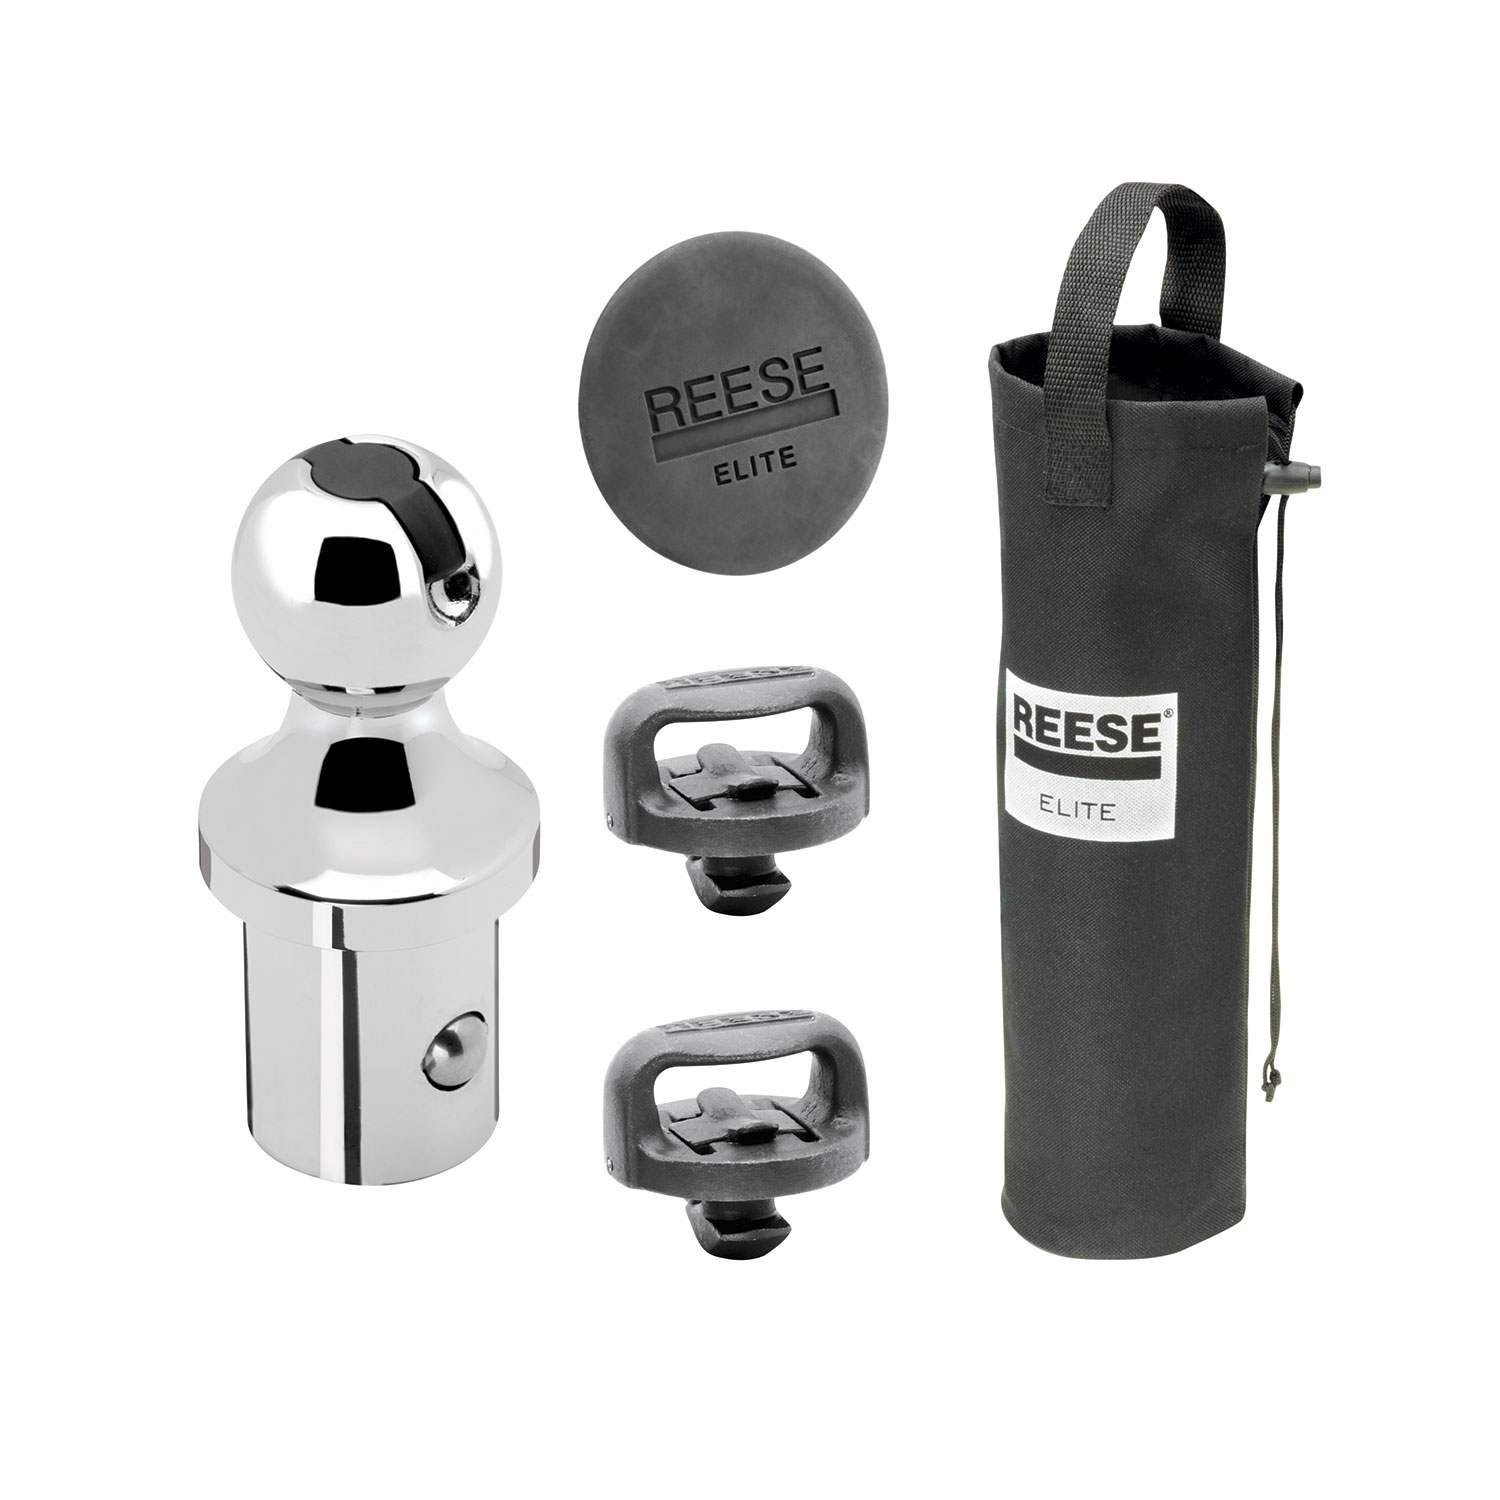 Reese Elite  Series Gooseneck Hitch Head Accessory, Kit, Gooseneck Hitch Ball, Storage Bag, Safety Chains, Hole Cover